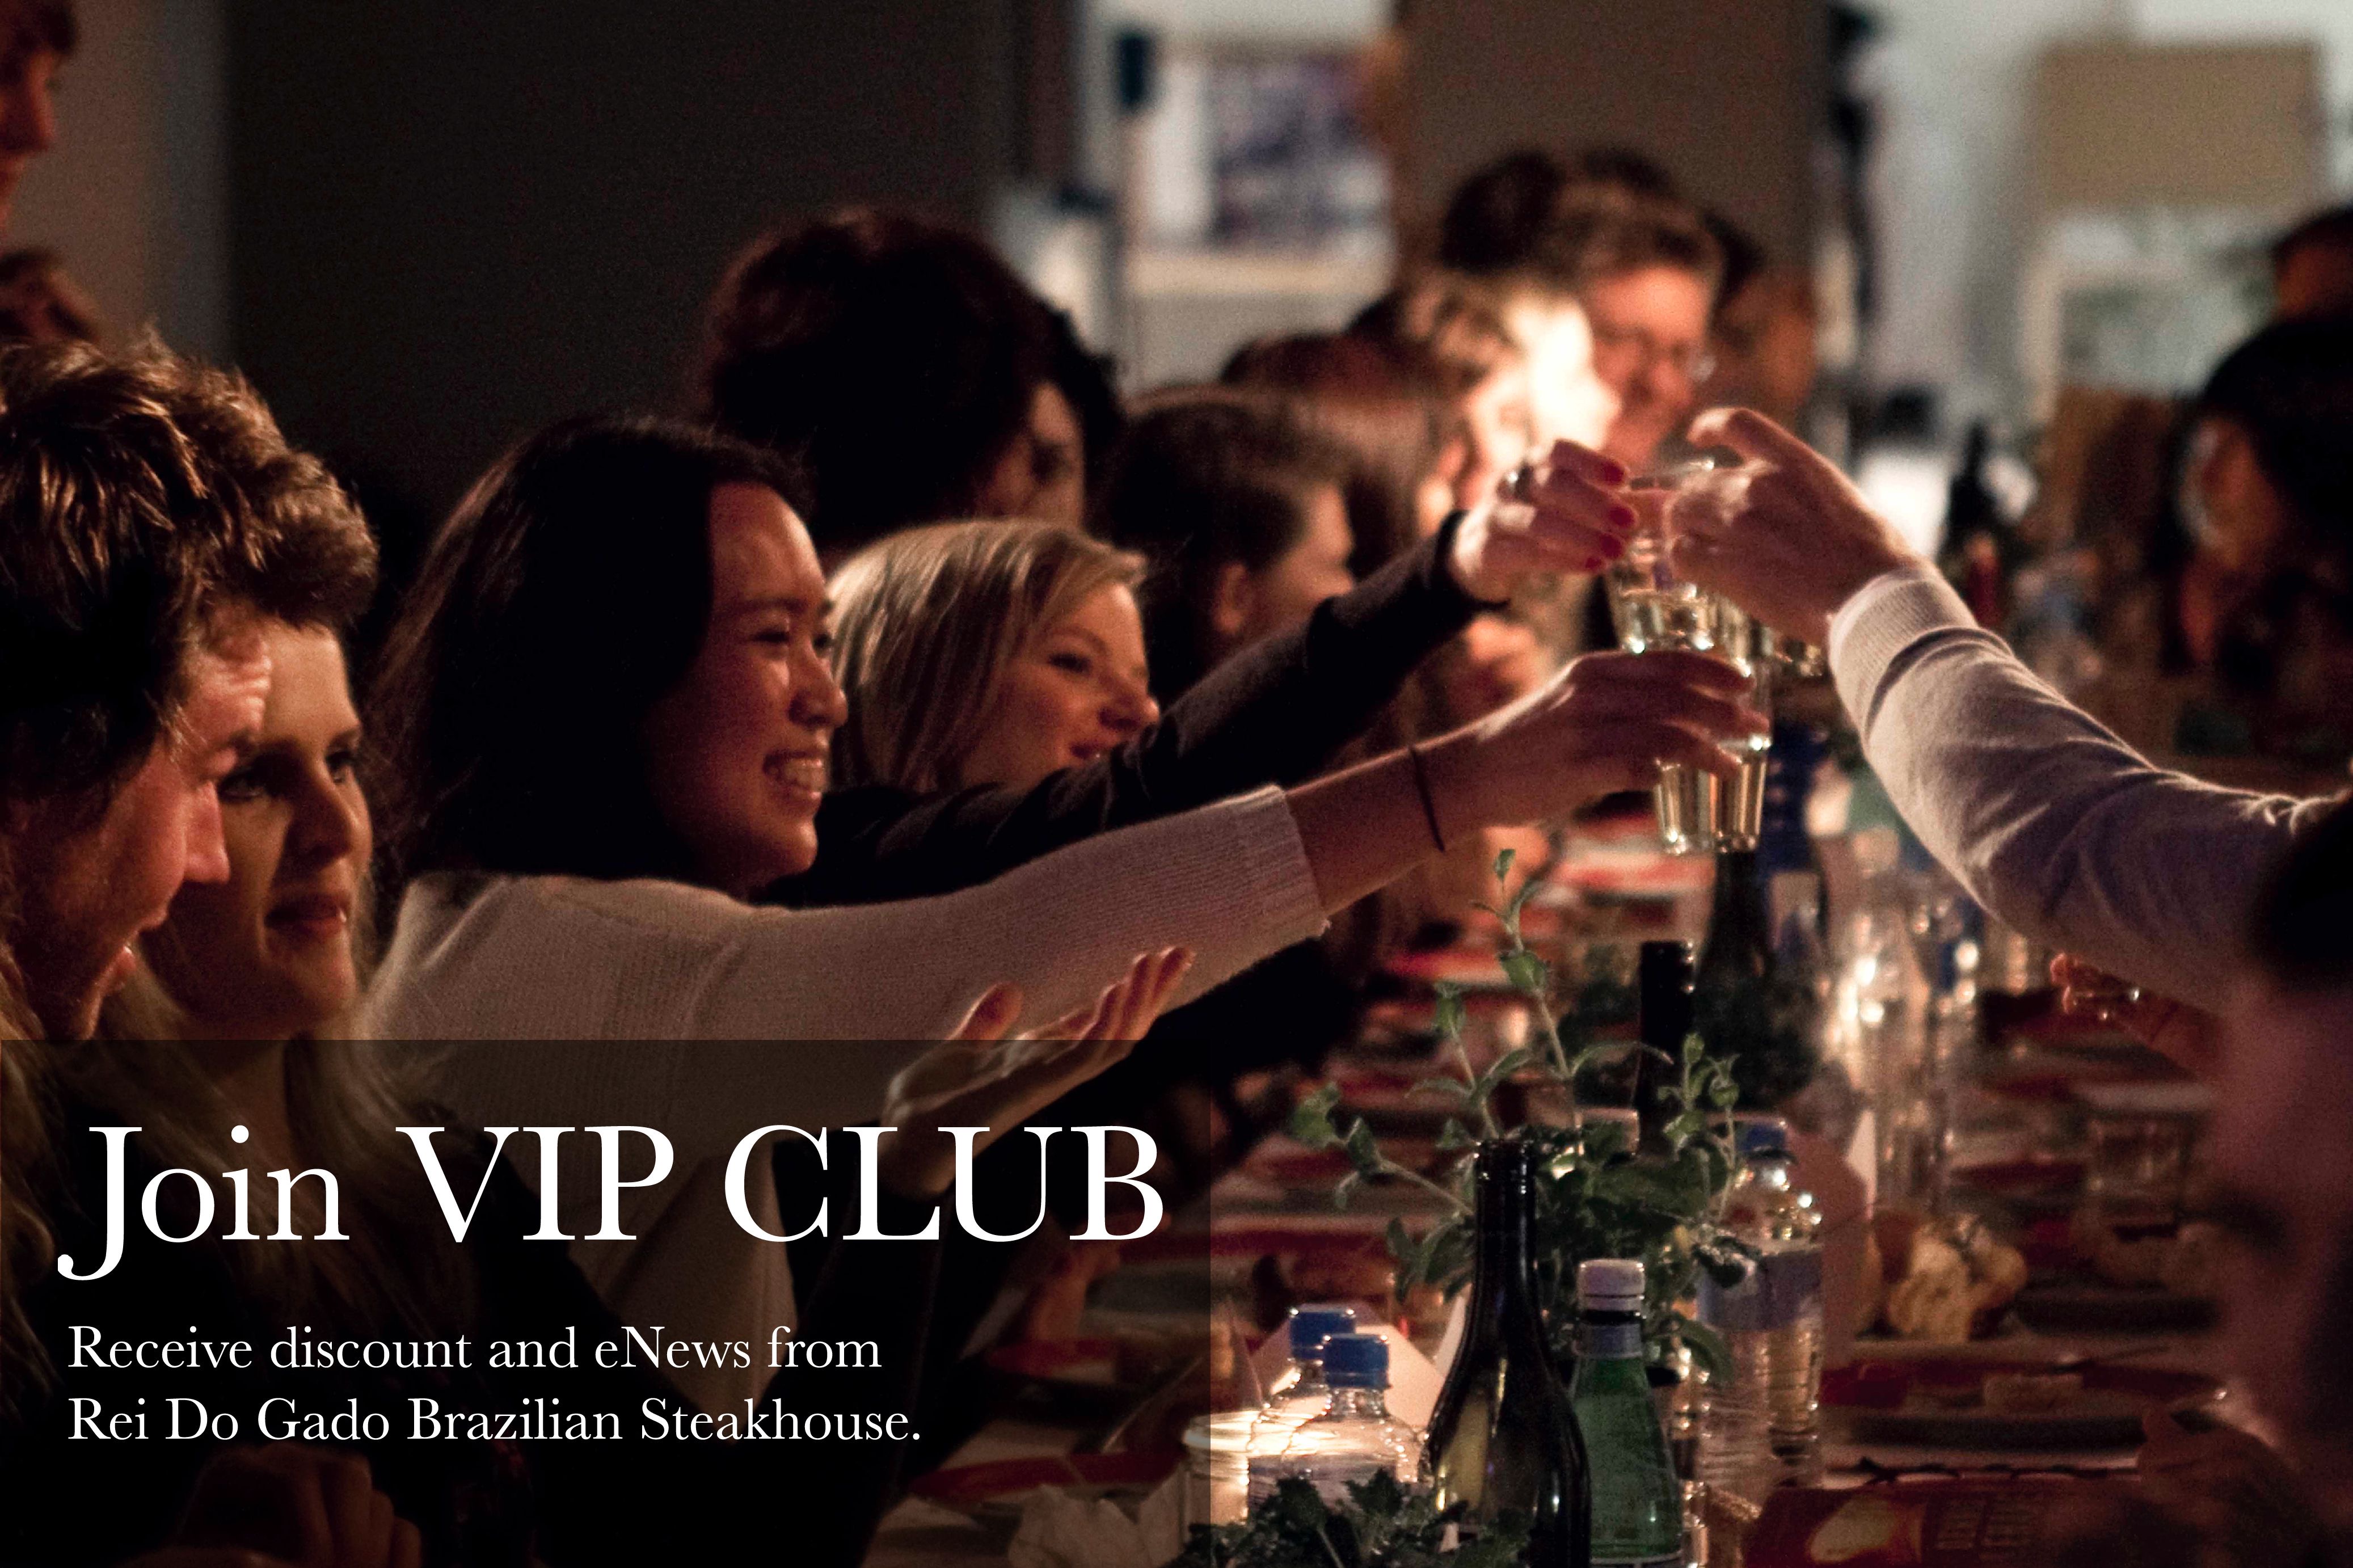 Join our VIP Club for special offers and announcements